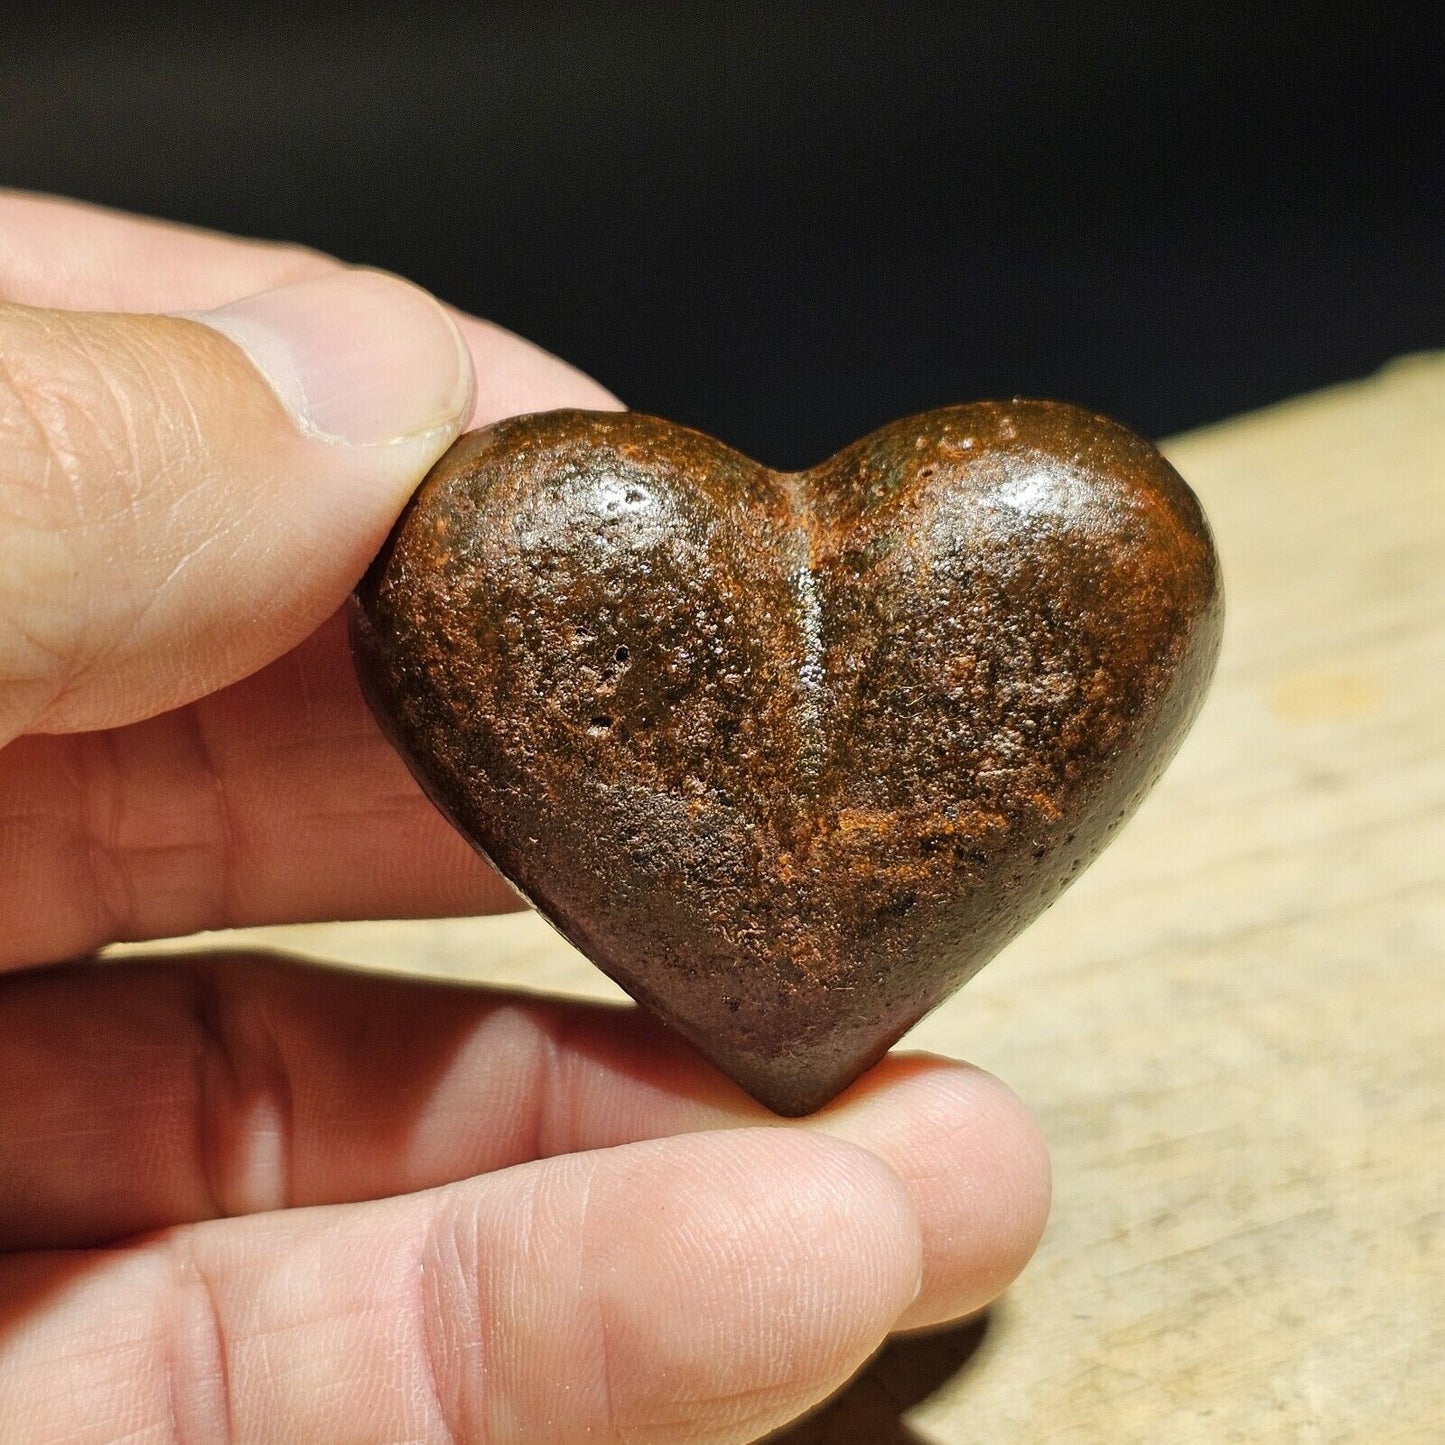 Vintage Style Iron Heart Paperweight